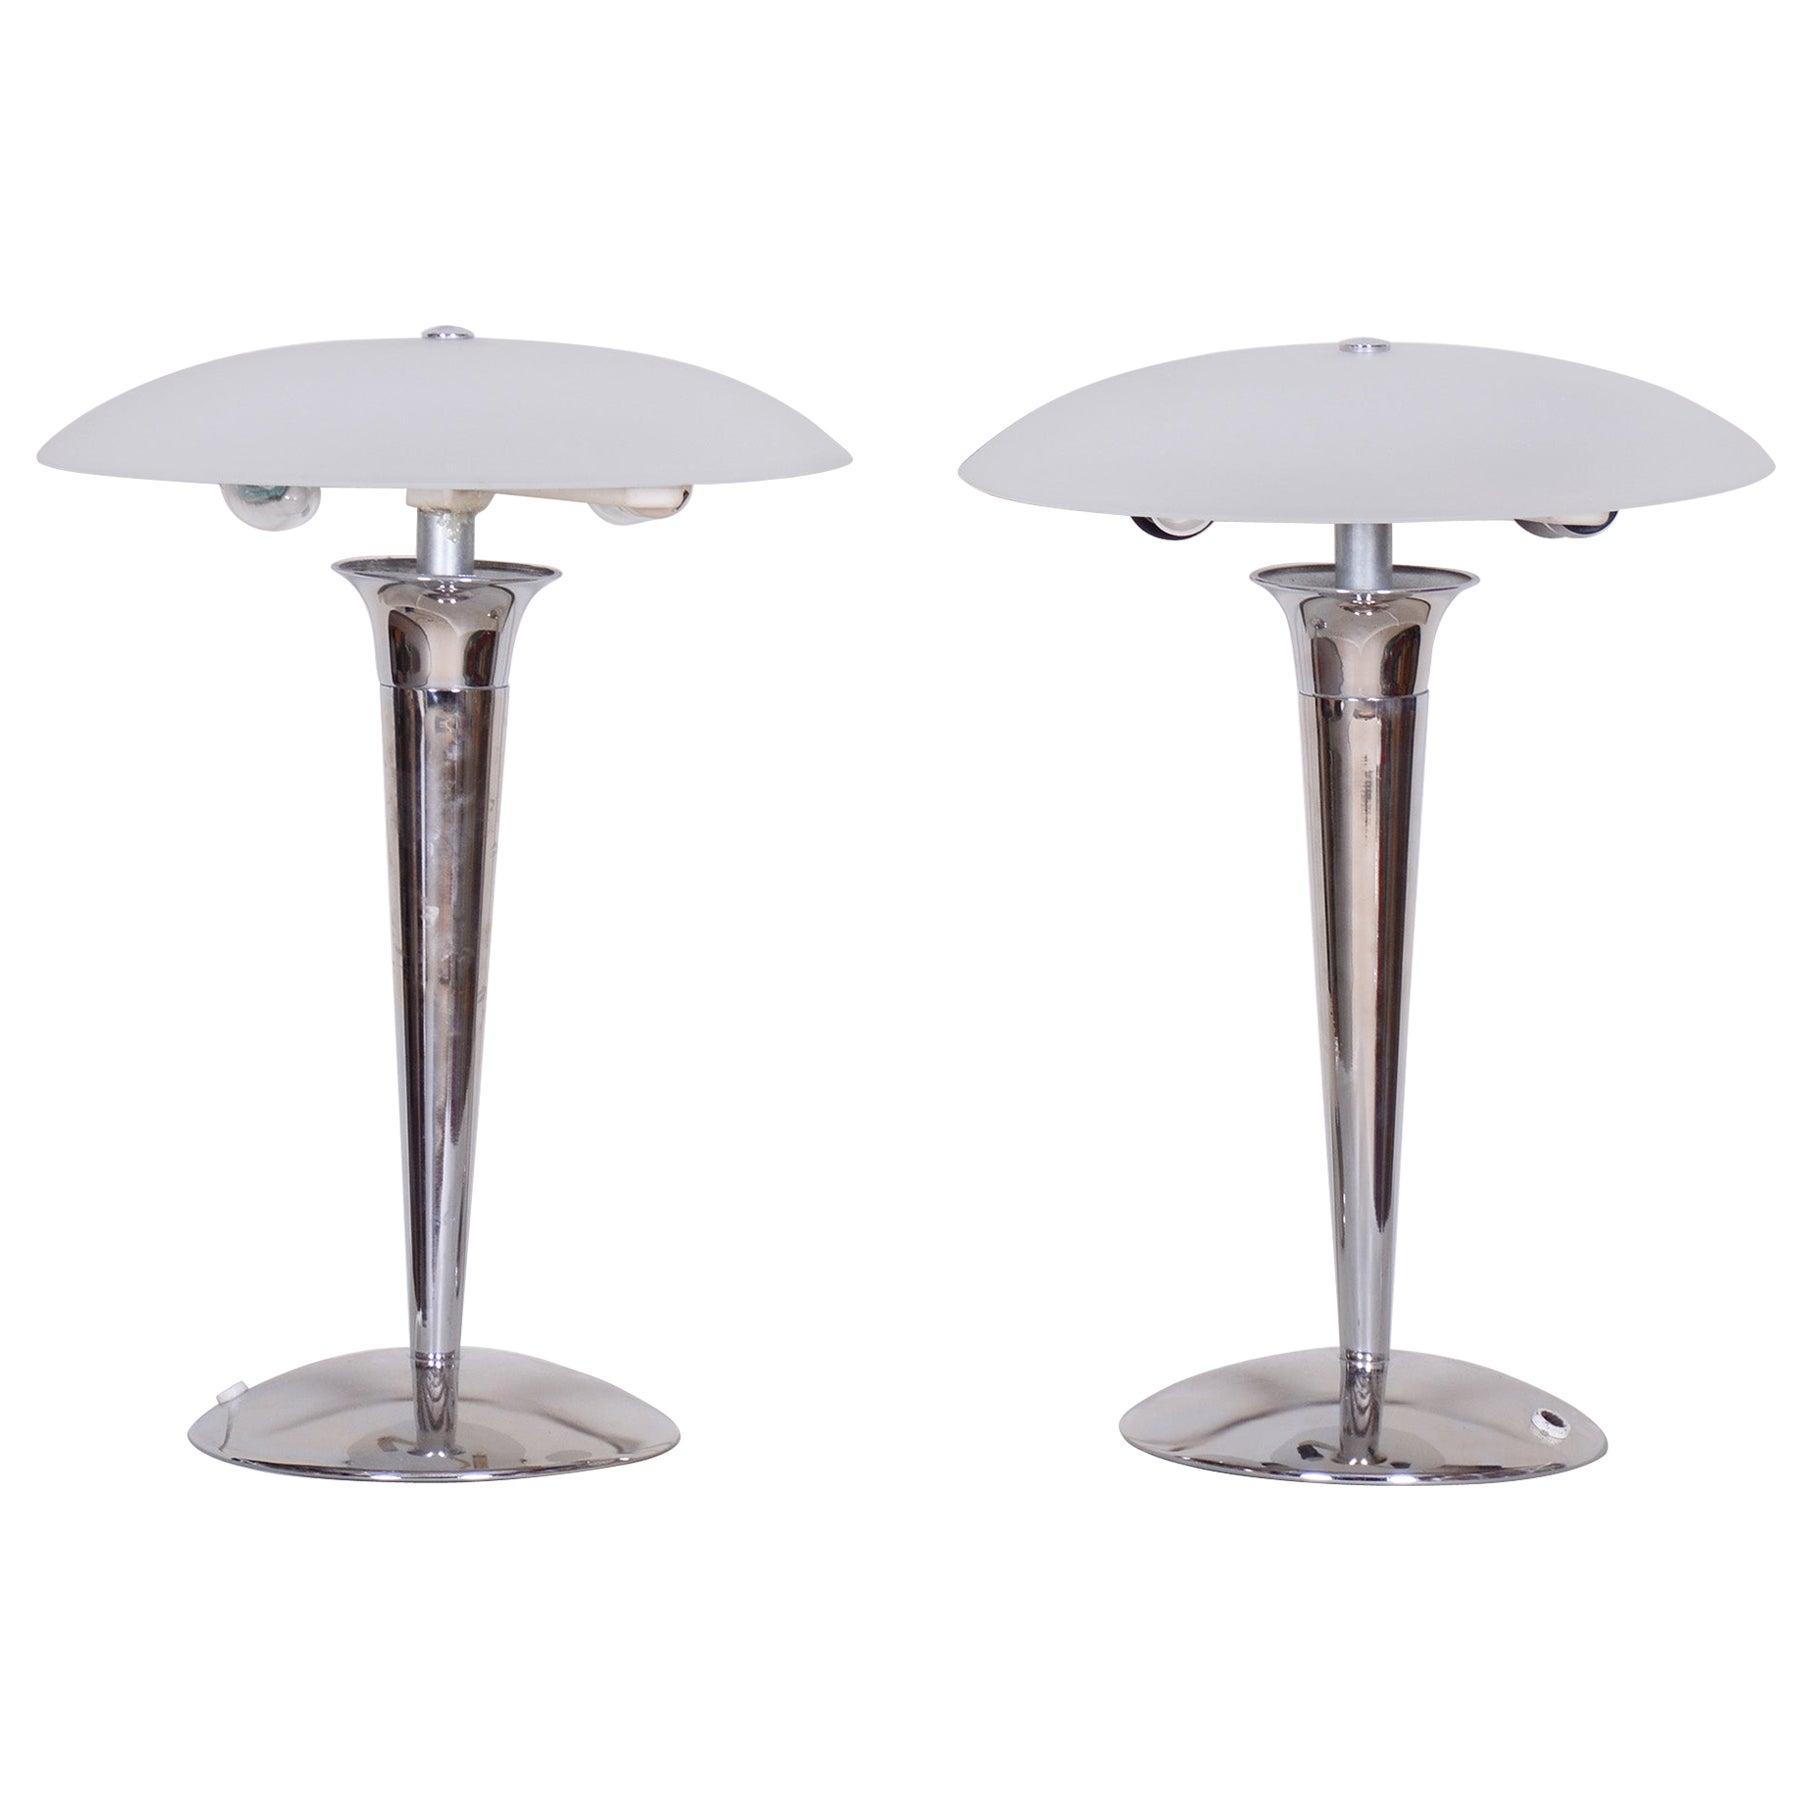 Pair of Midcentury Table Lamps, Chrome-Plated Steel, Milk Glass, Germany, 1950s For Sale